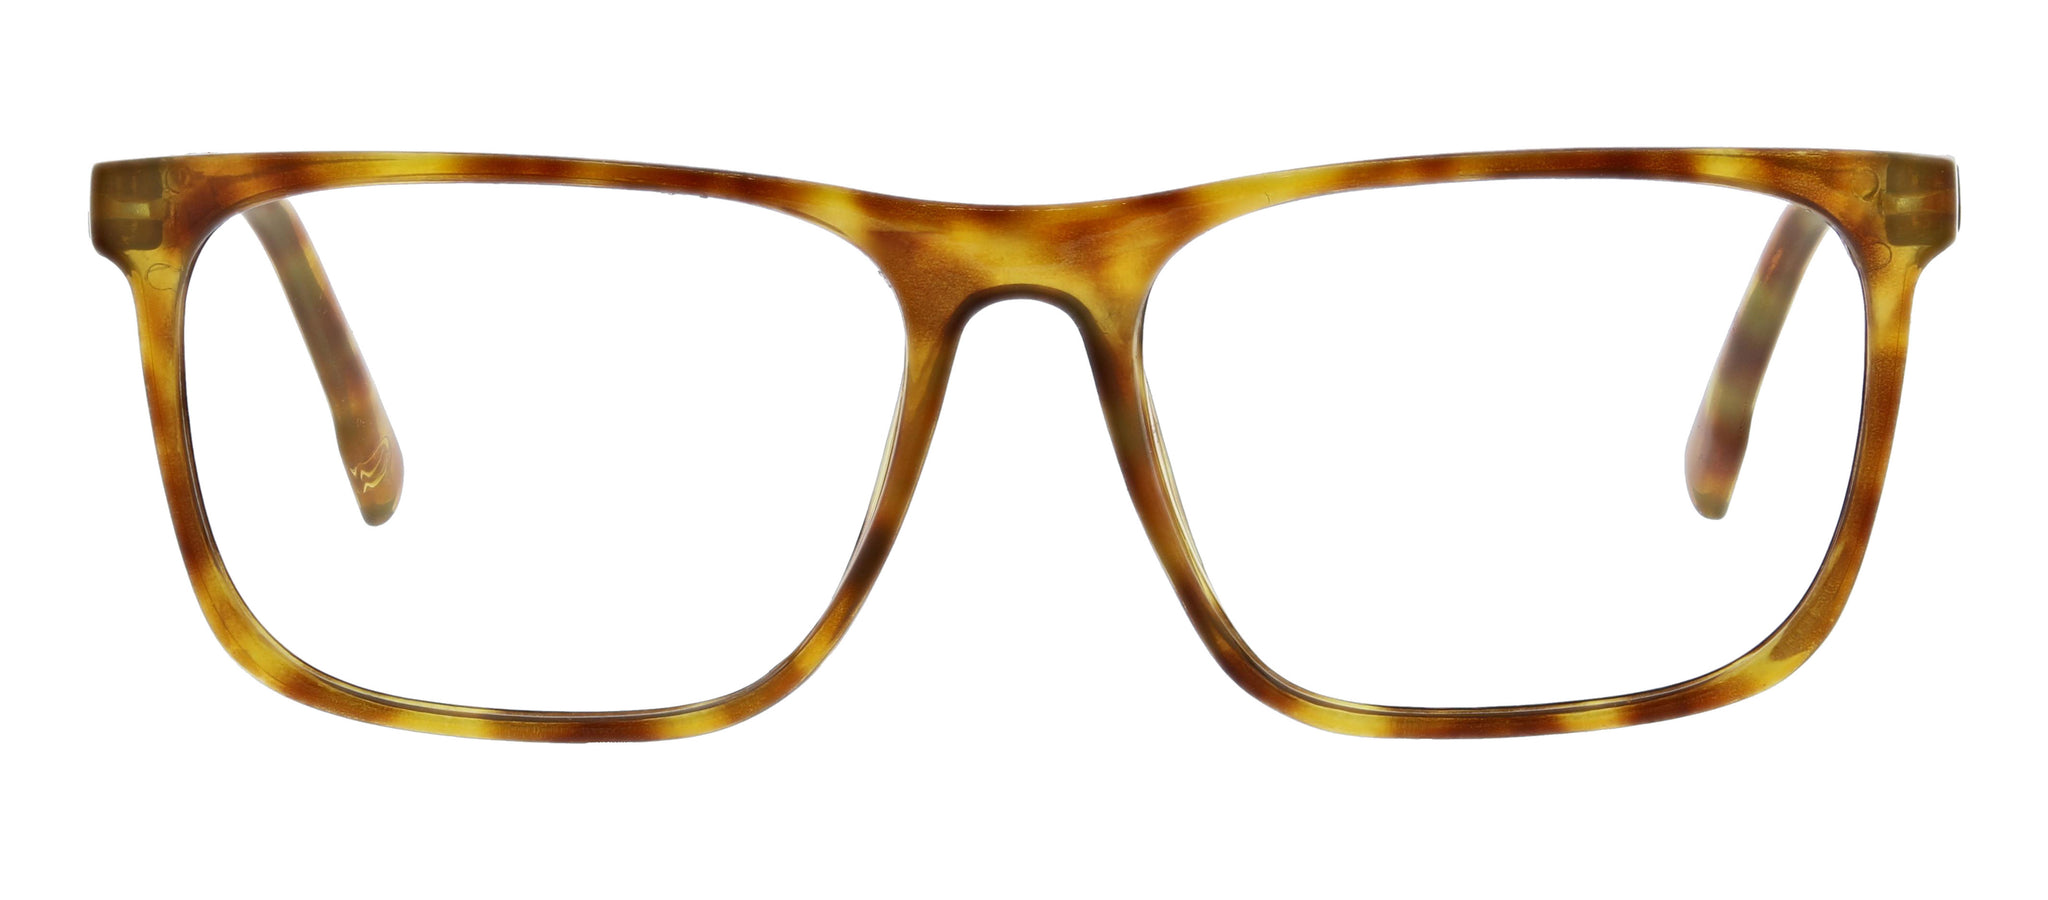 Highbrow Peepers blue light reading glasses